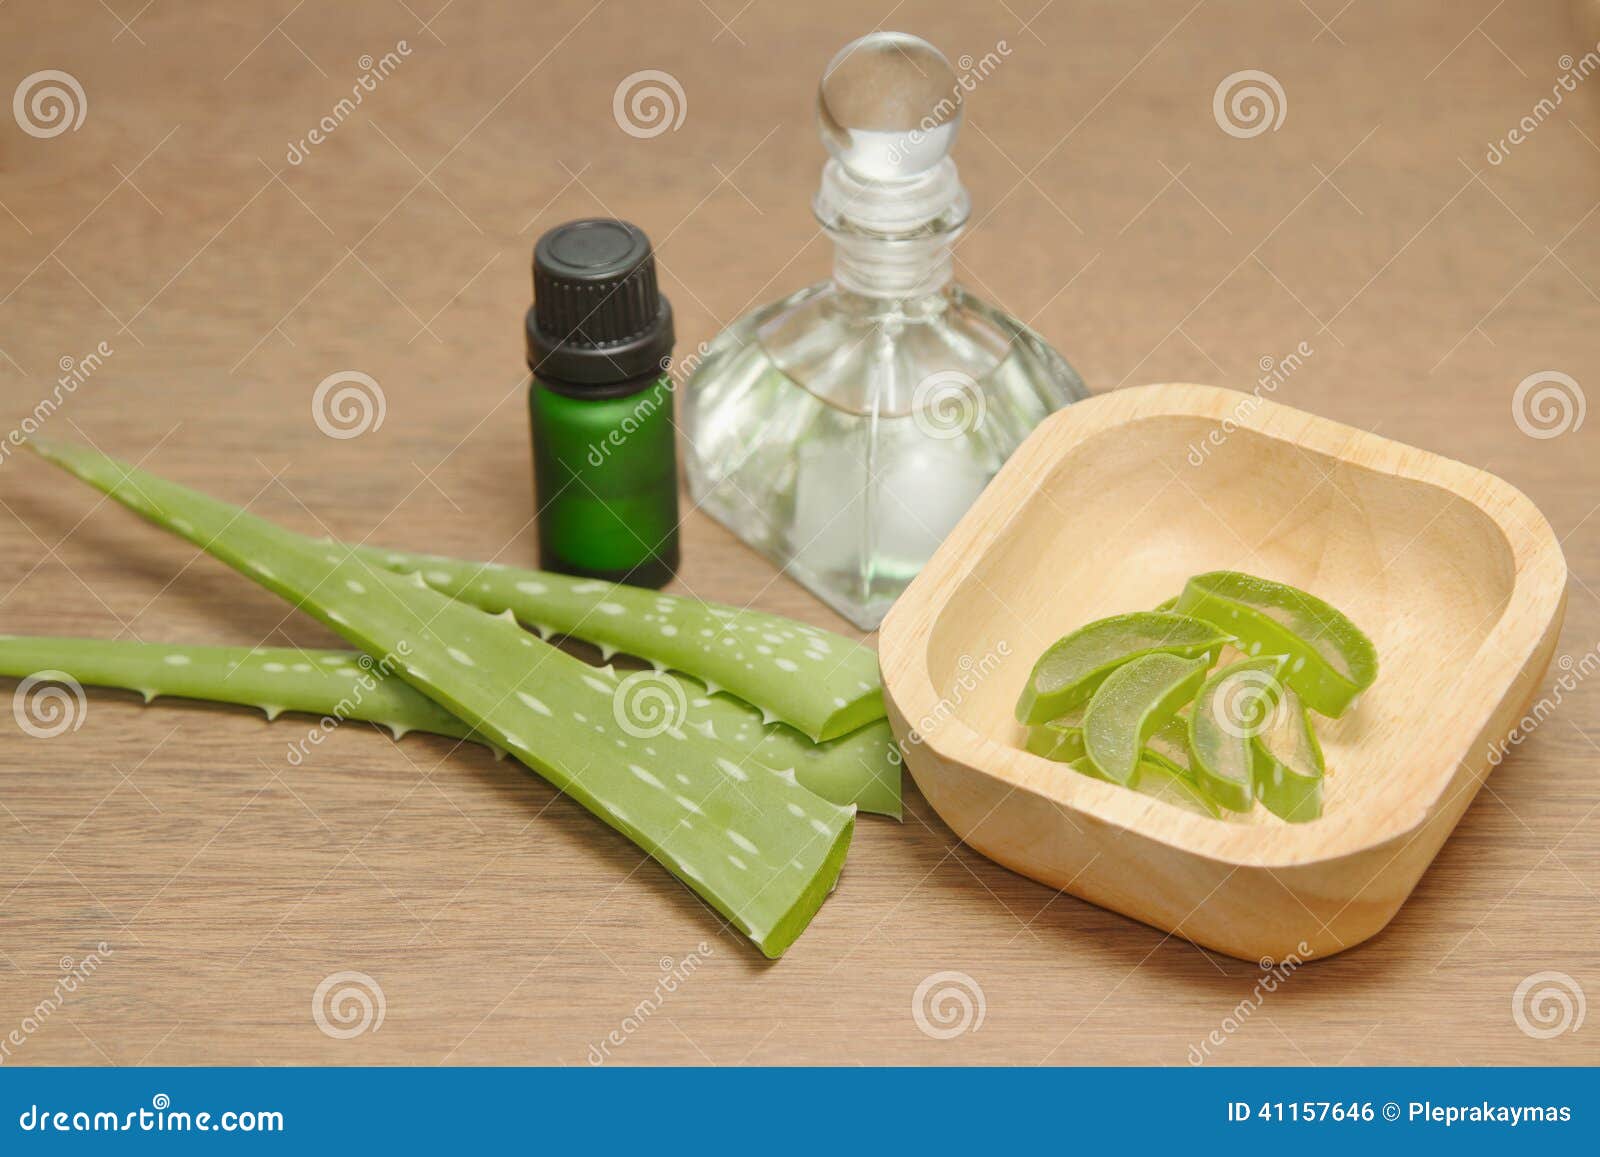 bottle of aloe vera essential oil with fresh plant